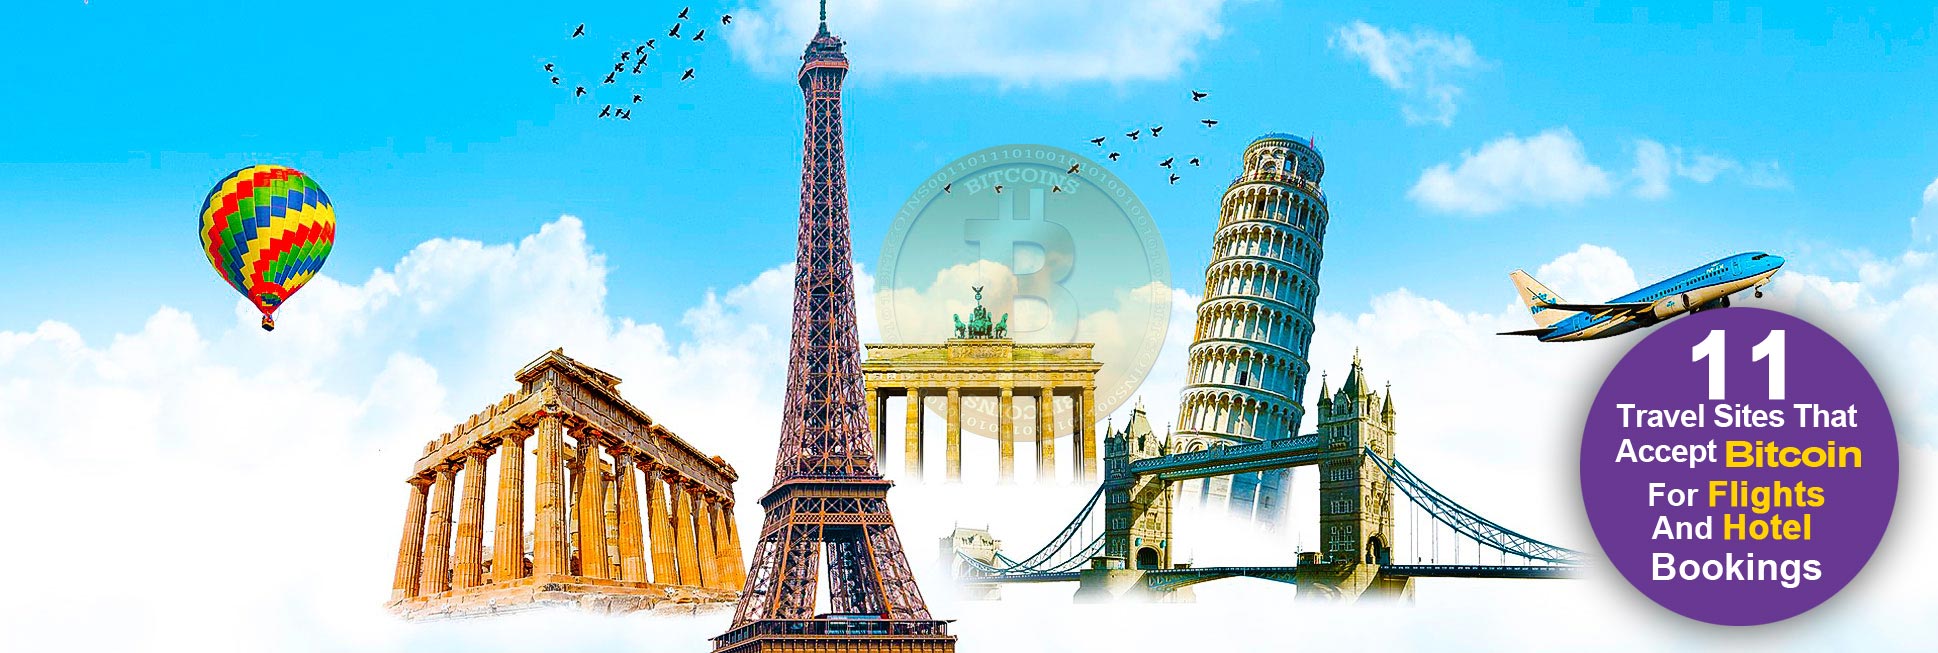 11 Travel Sites That Accept Bitcoins For Flights And Hotels